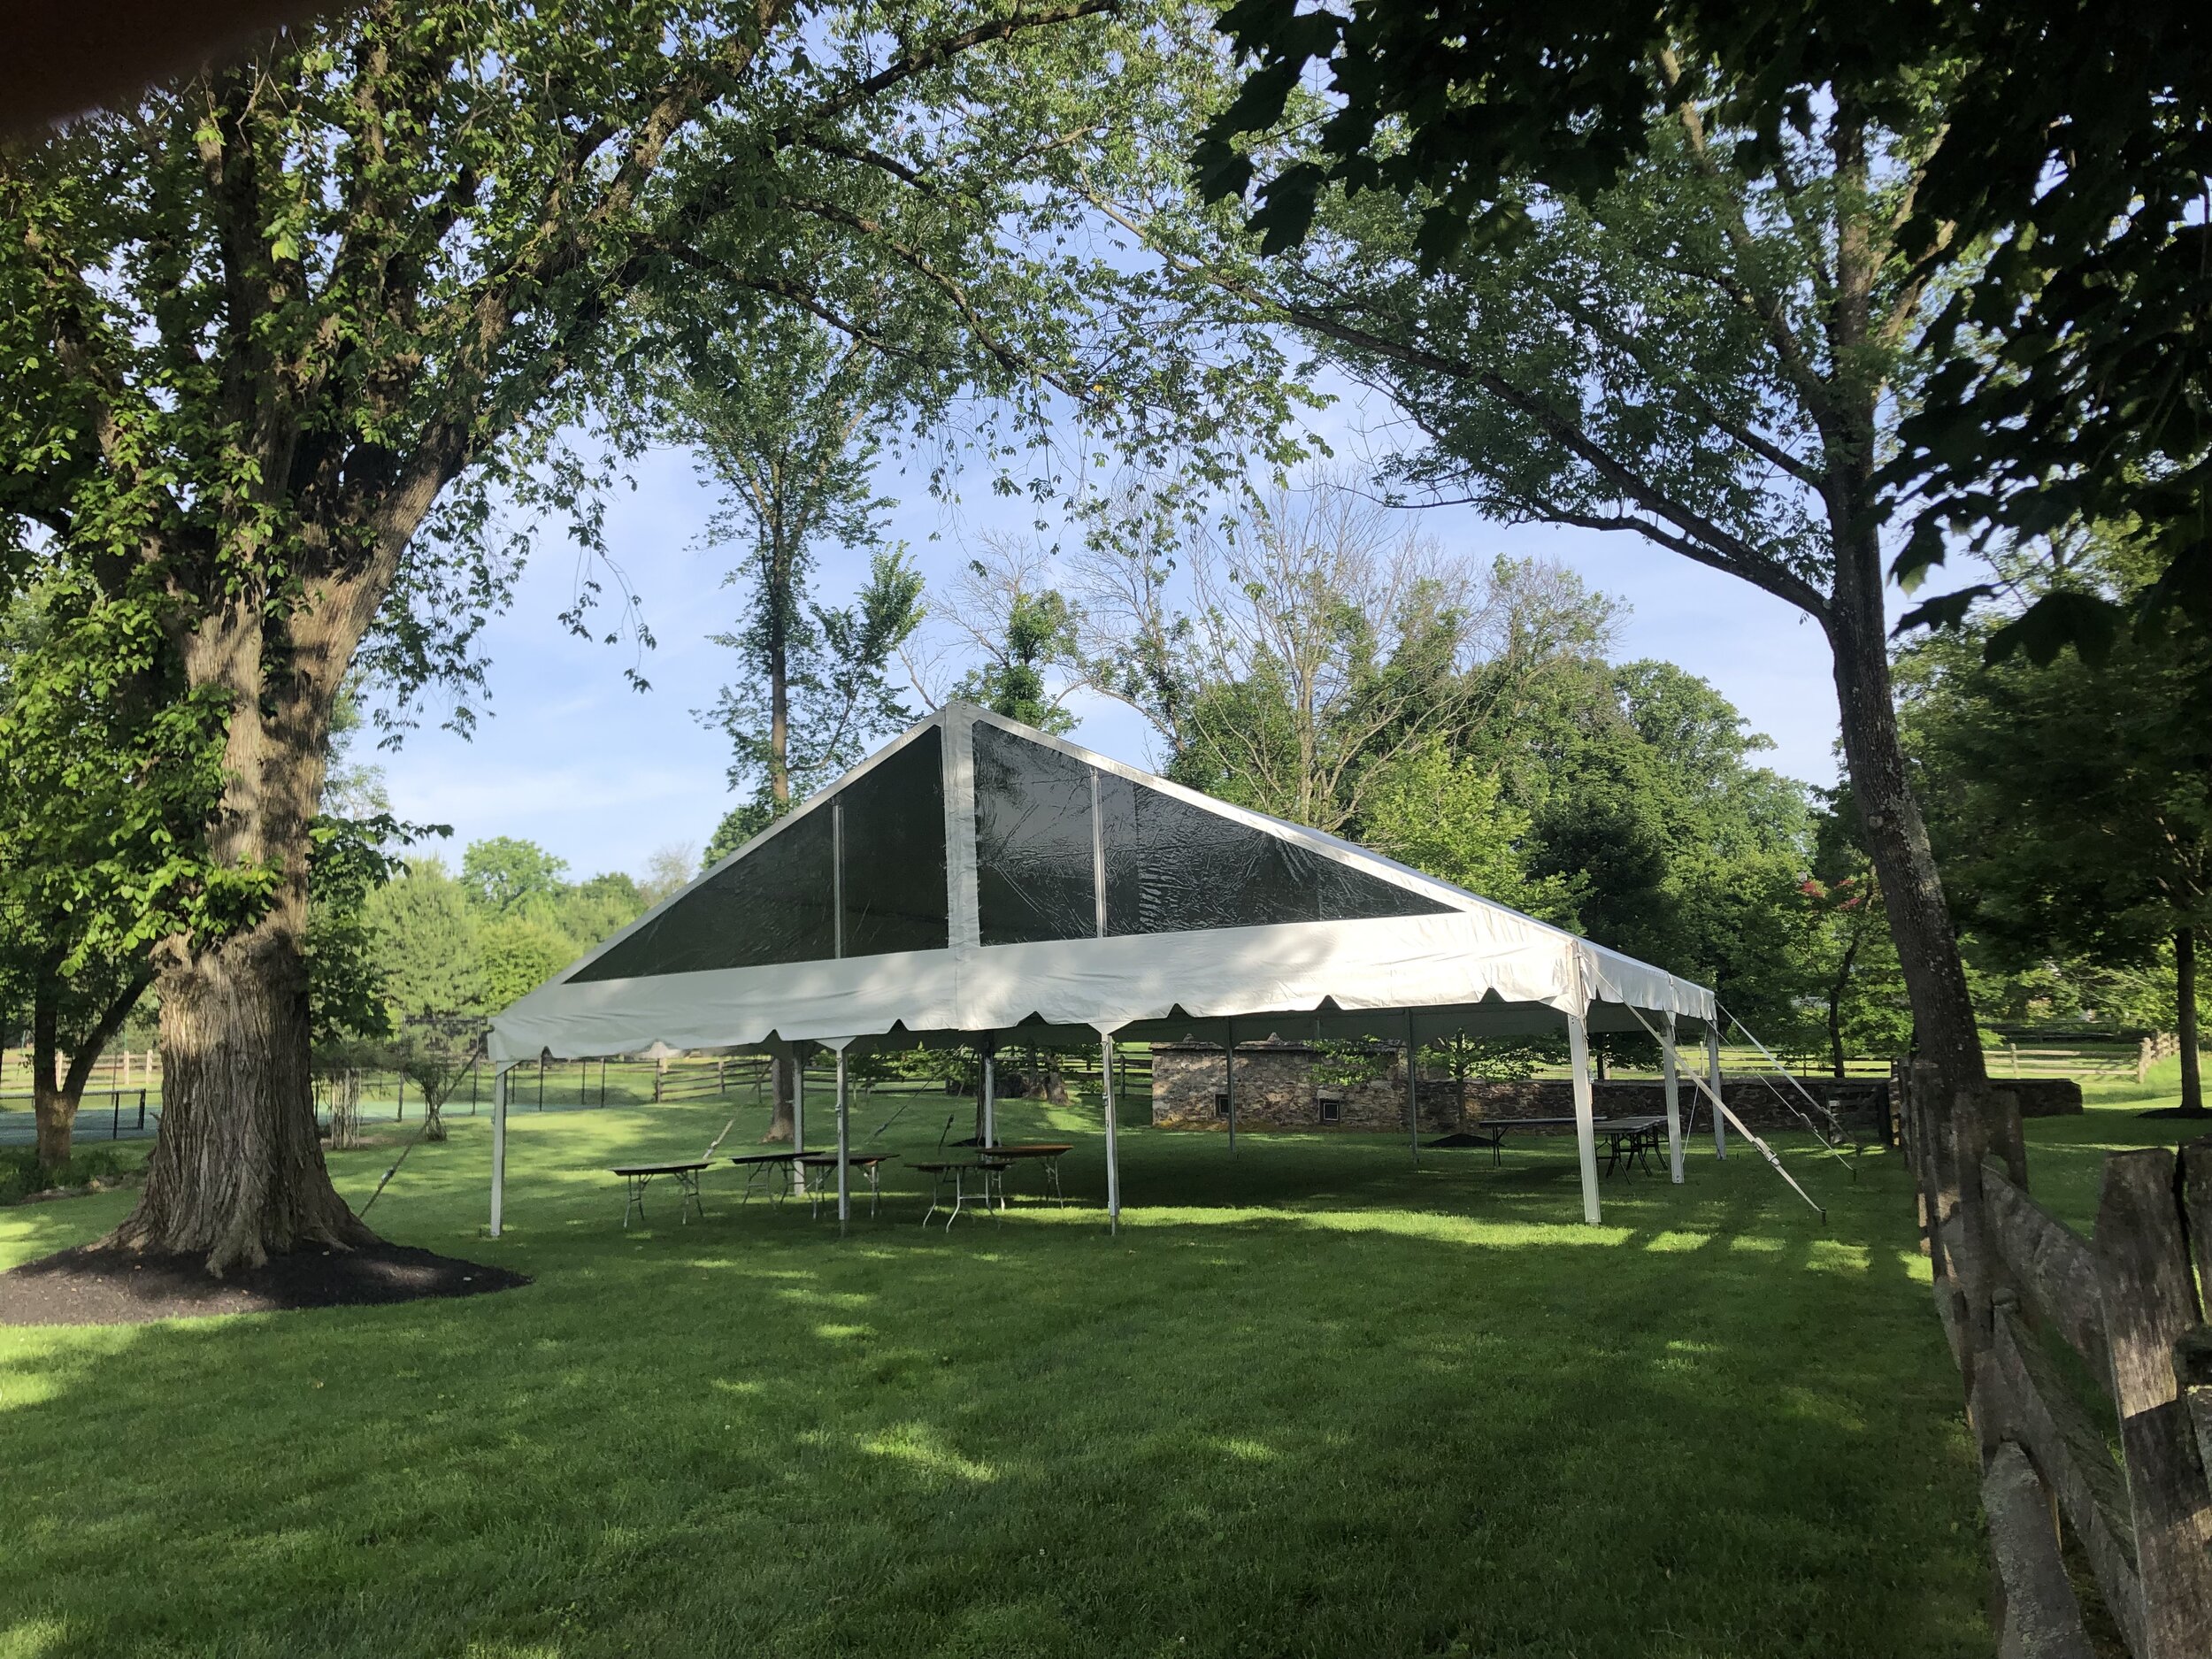 40x40 frame tent with clear end